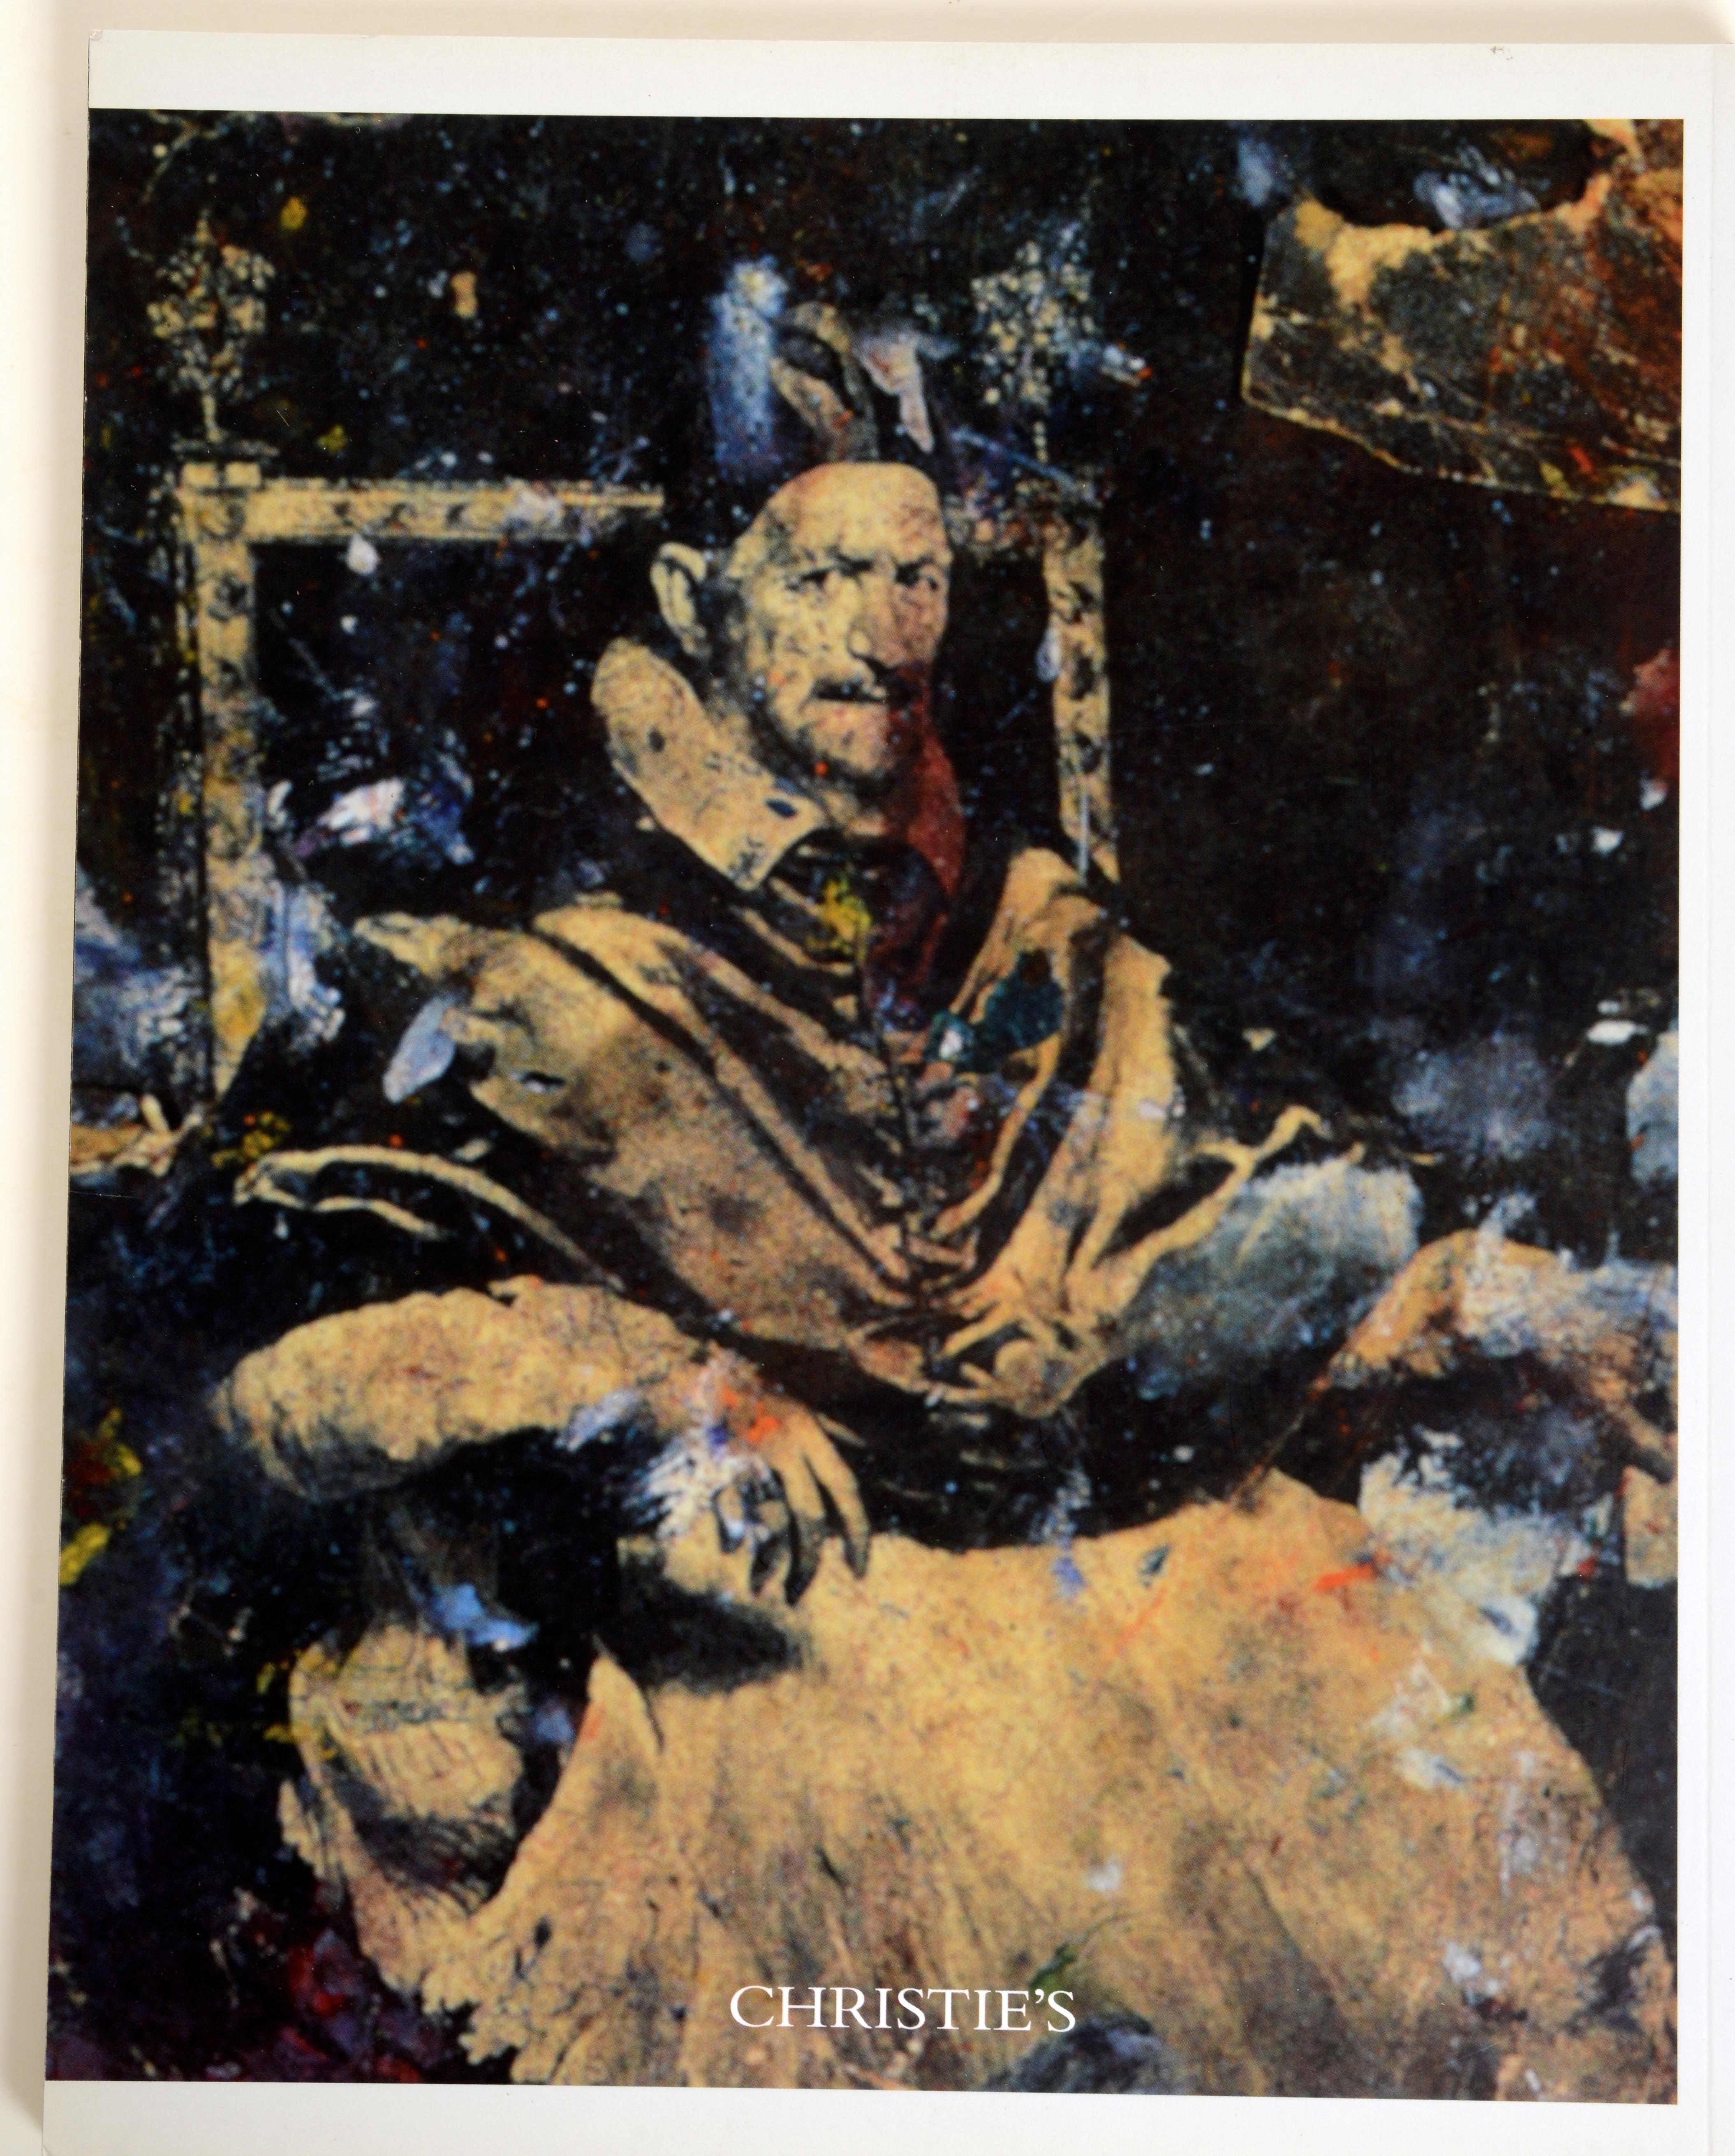 Christie's Francis Bacon / FRANCIS BACON SEATED FIGURE 1960. Christies, NY. 1st Edition Paperback. The work, entitled Seated Figure (Red Cardinal), is a fantastic representation of Bacon's papal series, which originates from his obsession with Diego